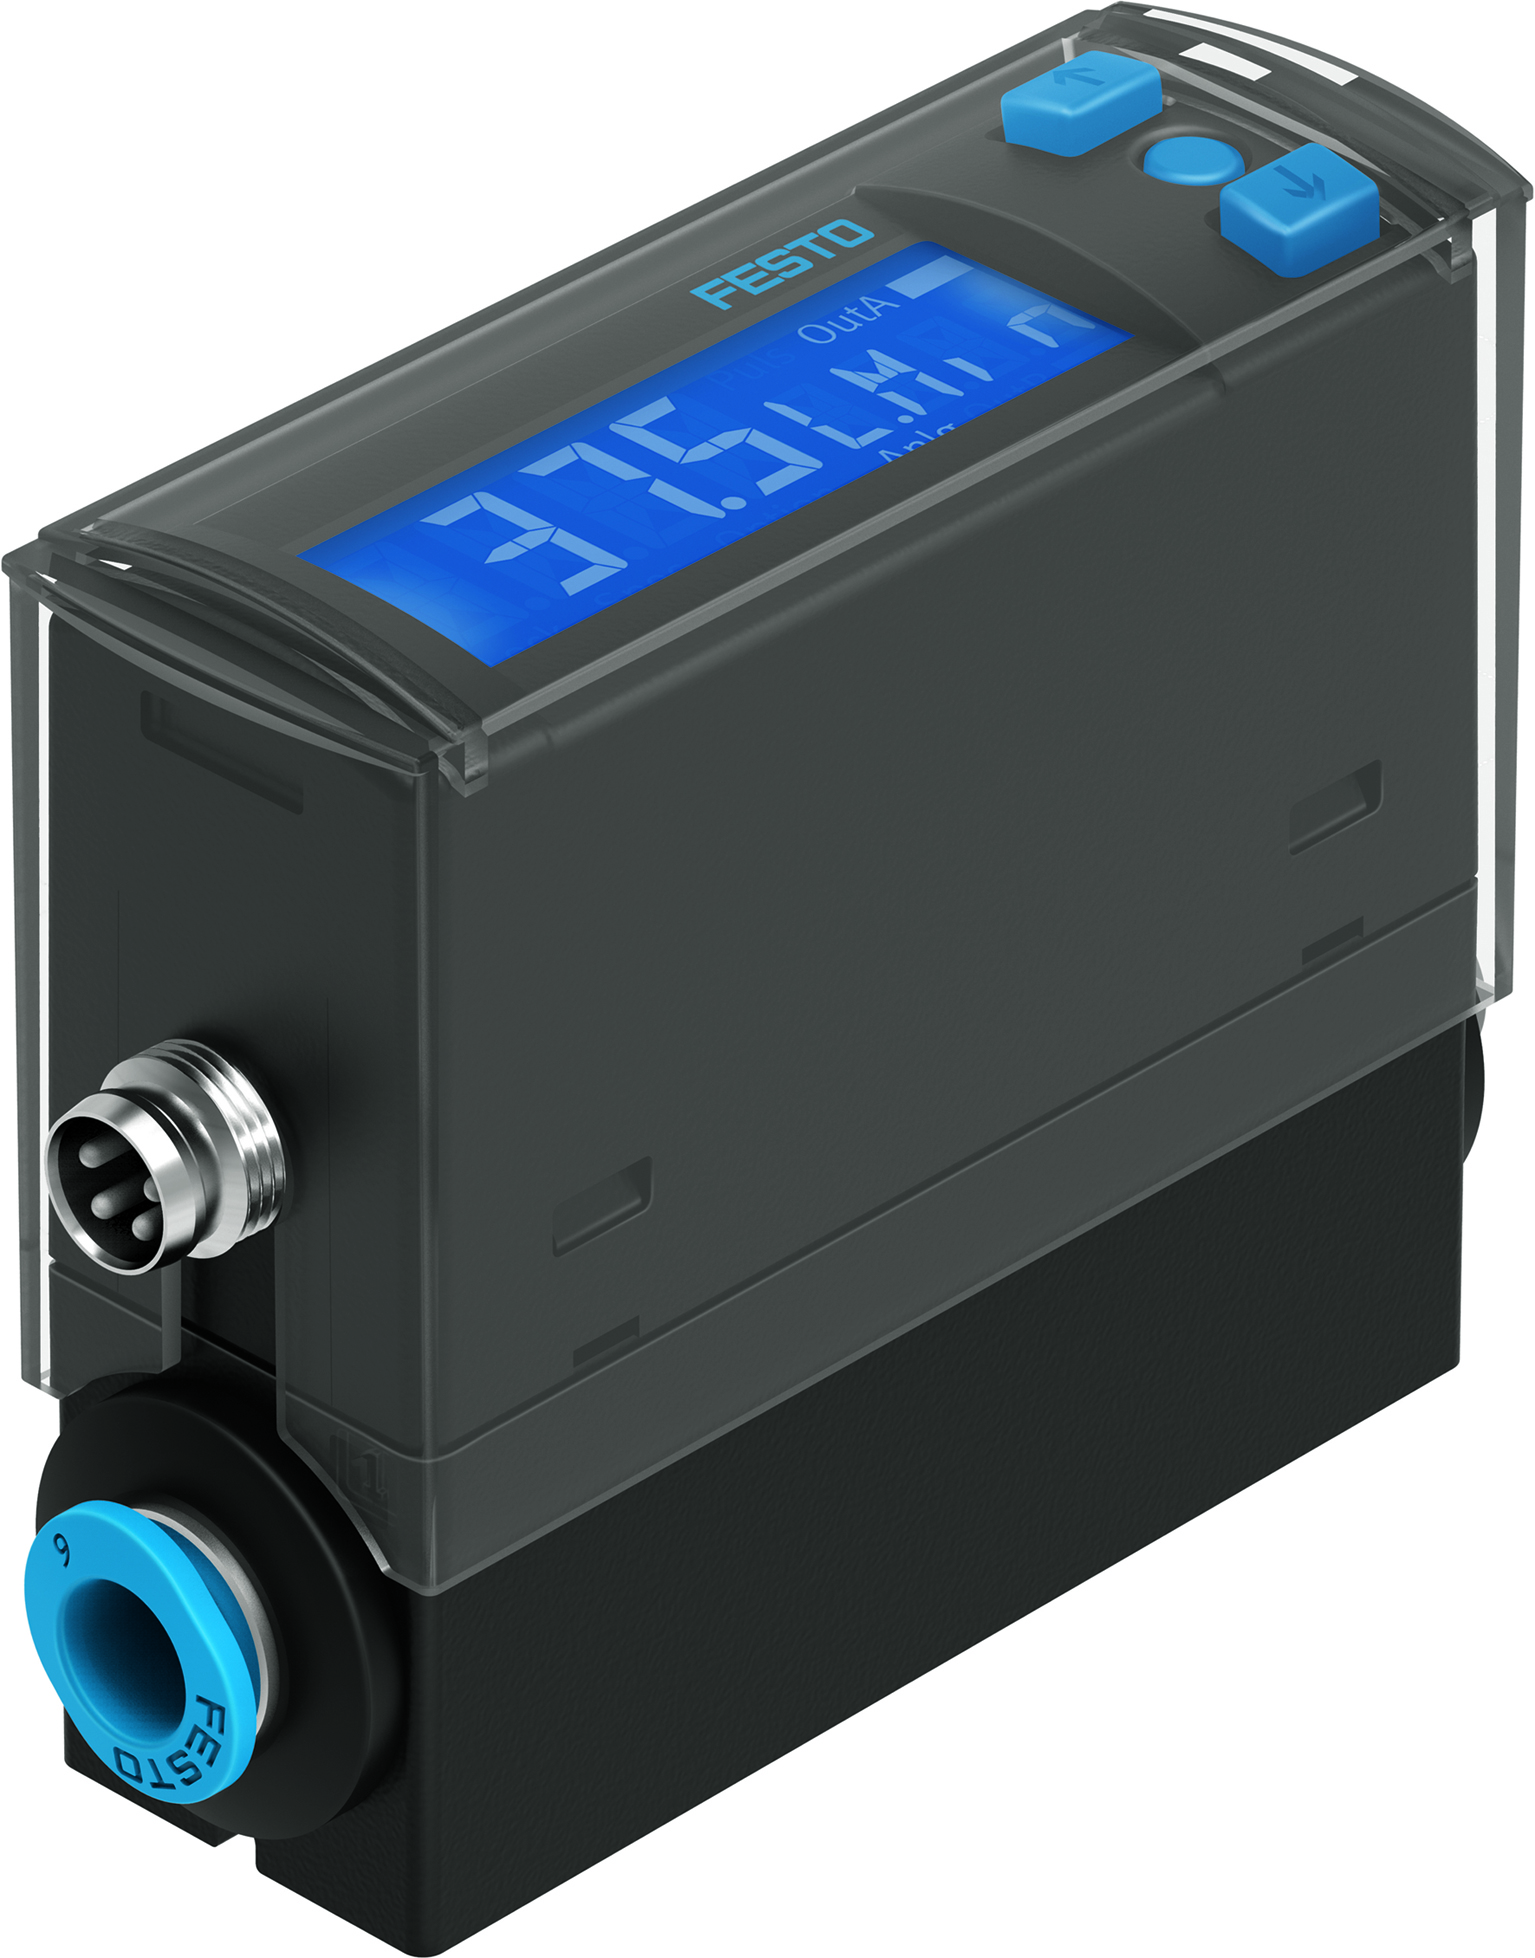 Festo’s new SFAH flow sensor monitors compressed air usage in general automation applications.